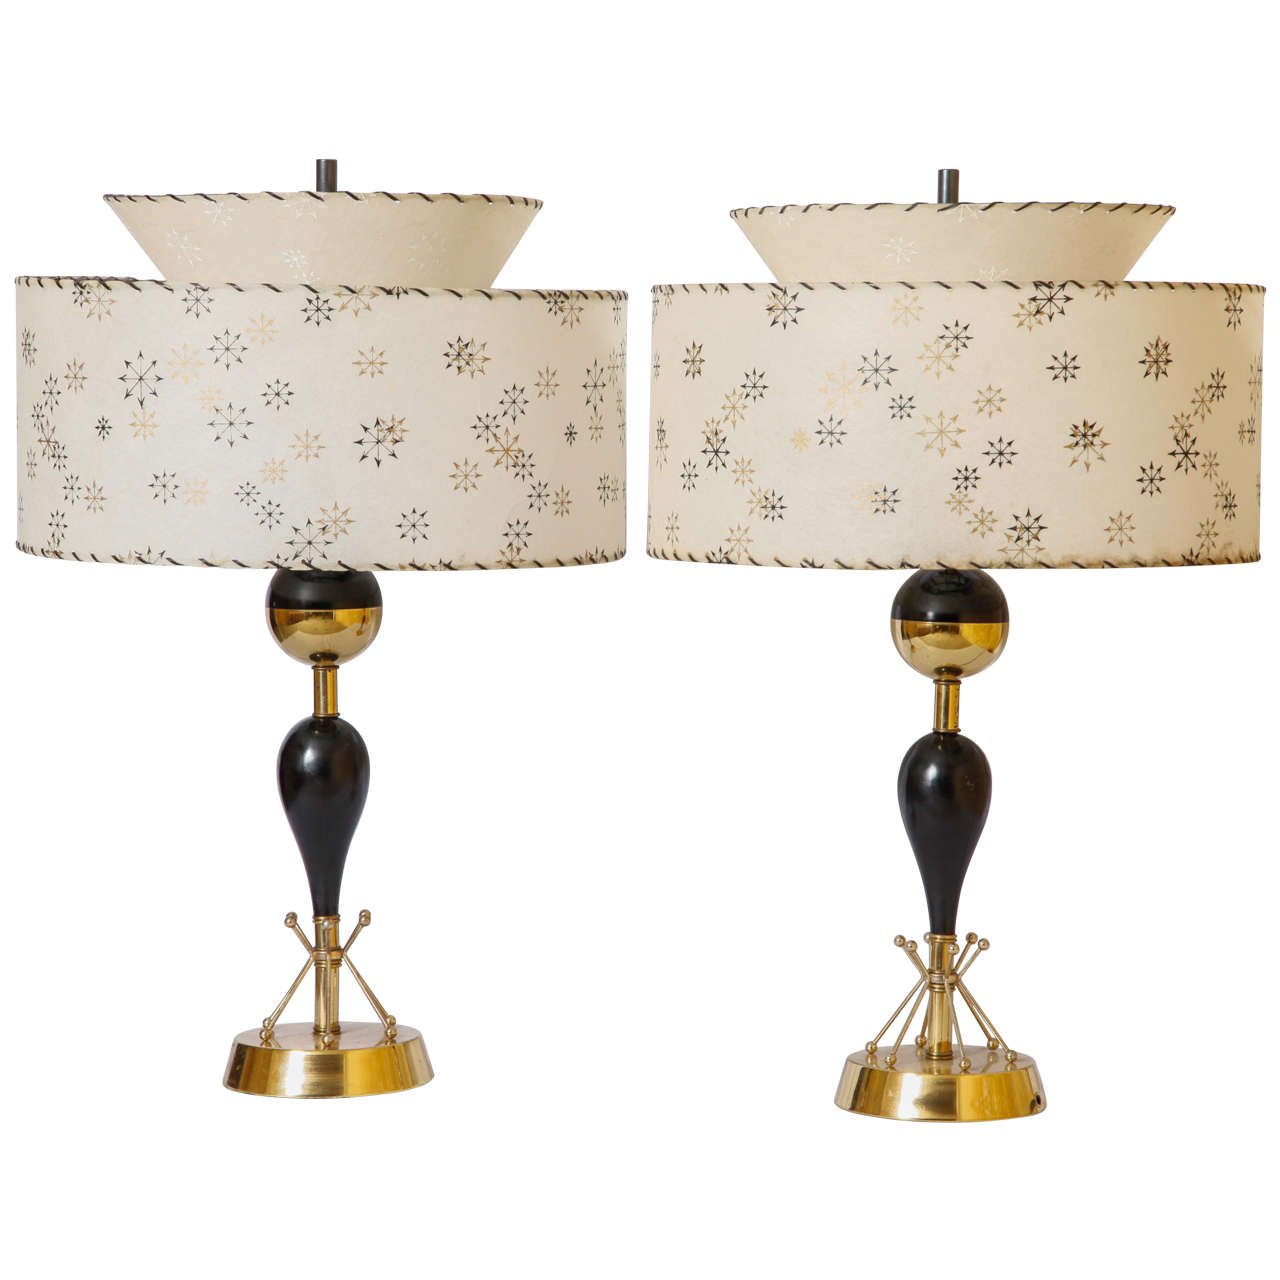 A Pair of Italian Table Lamps